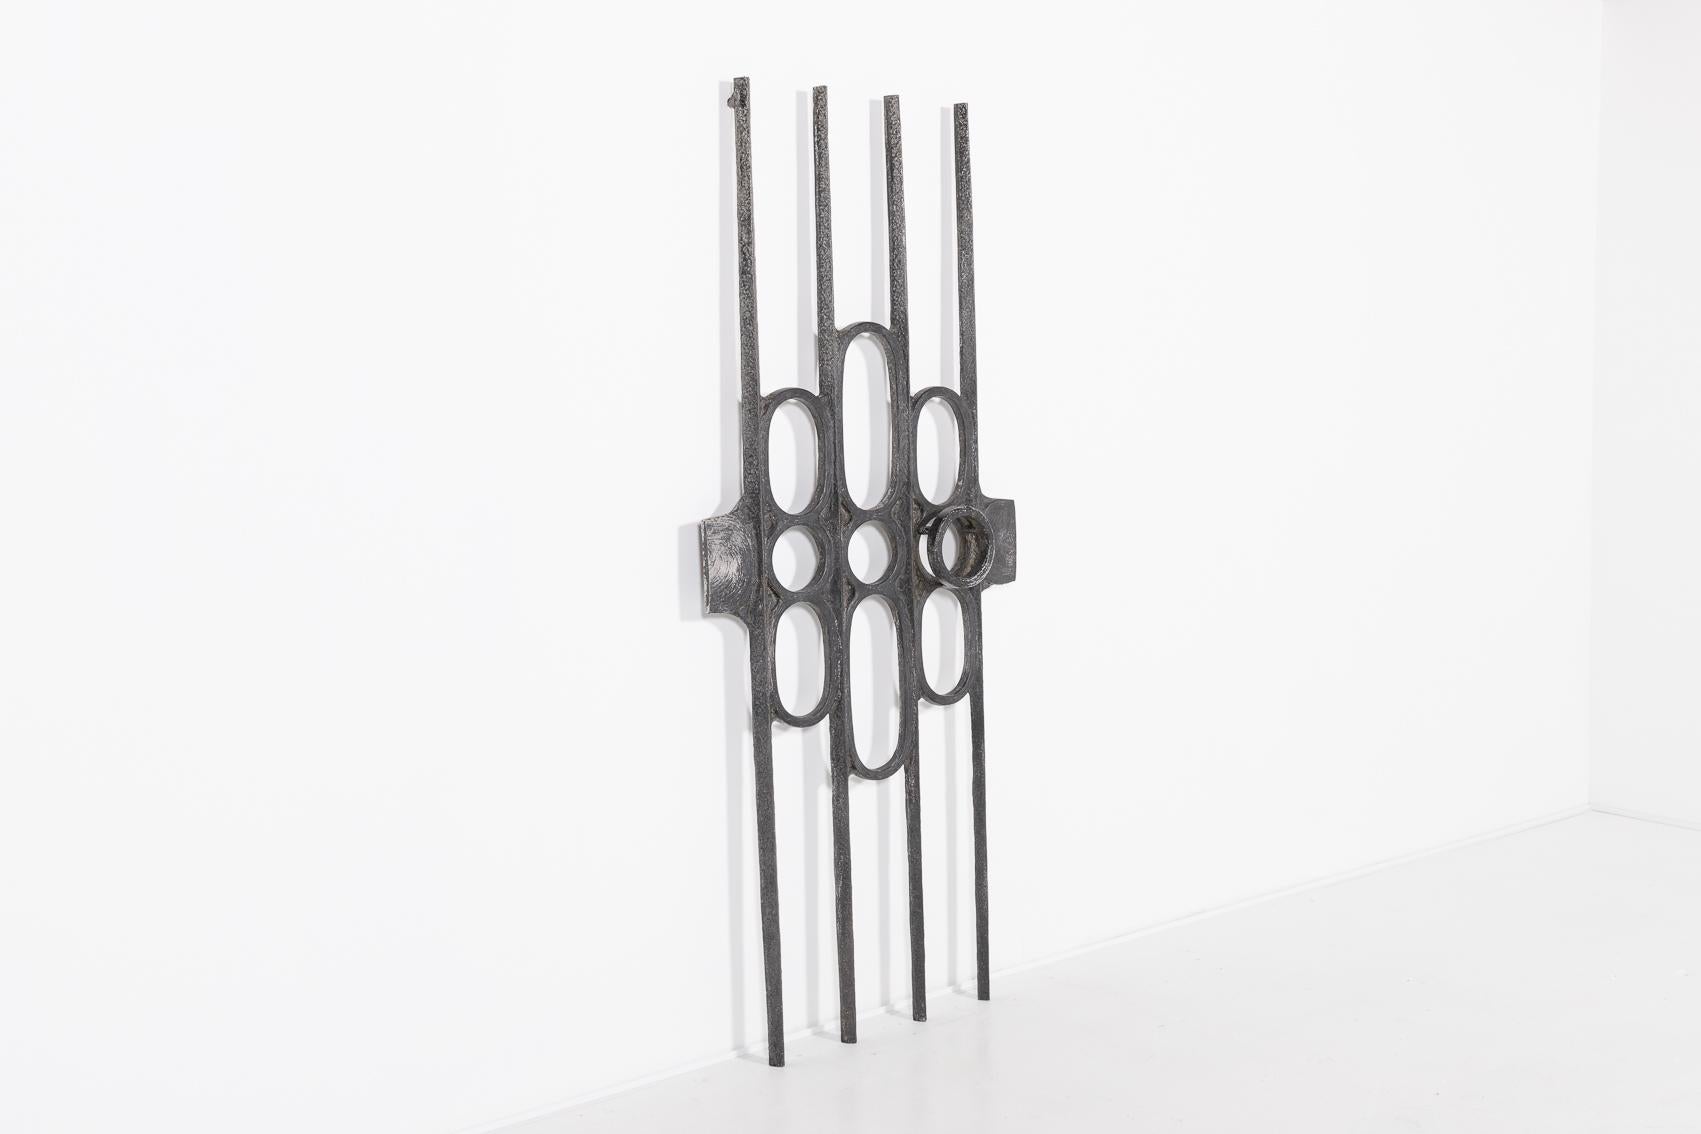 Impressive Brutalist casted aluminium door fixture/decoration. It can also be used as spectacular wall art sculpture.

Condition
Good, usage wear

Dimensions
width: 32,68 inch
depth: 1,57 inch, including handle 3,93 inch
height: 75,98 inch